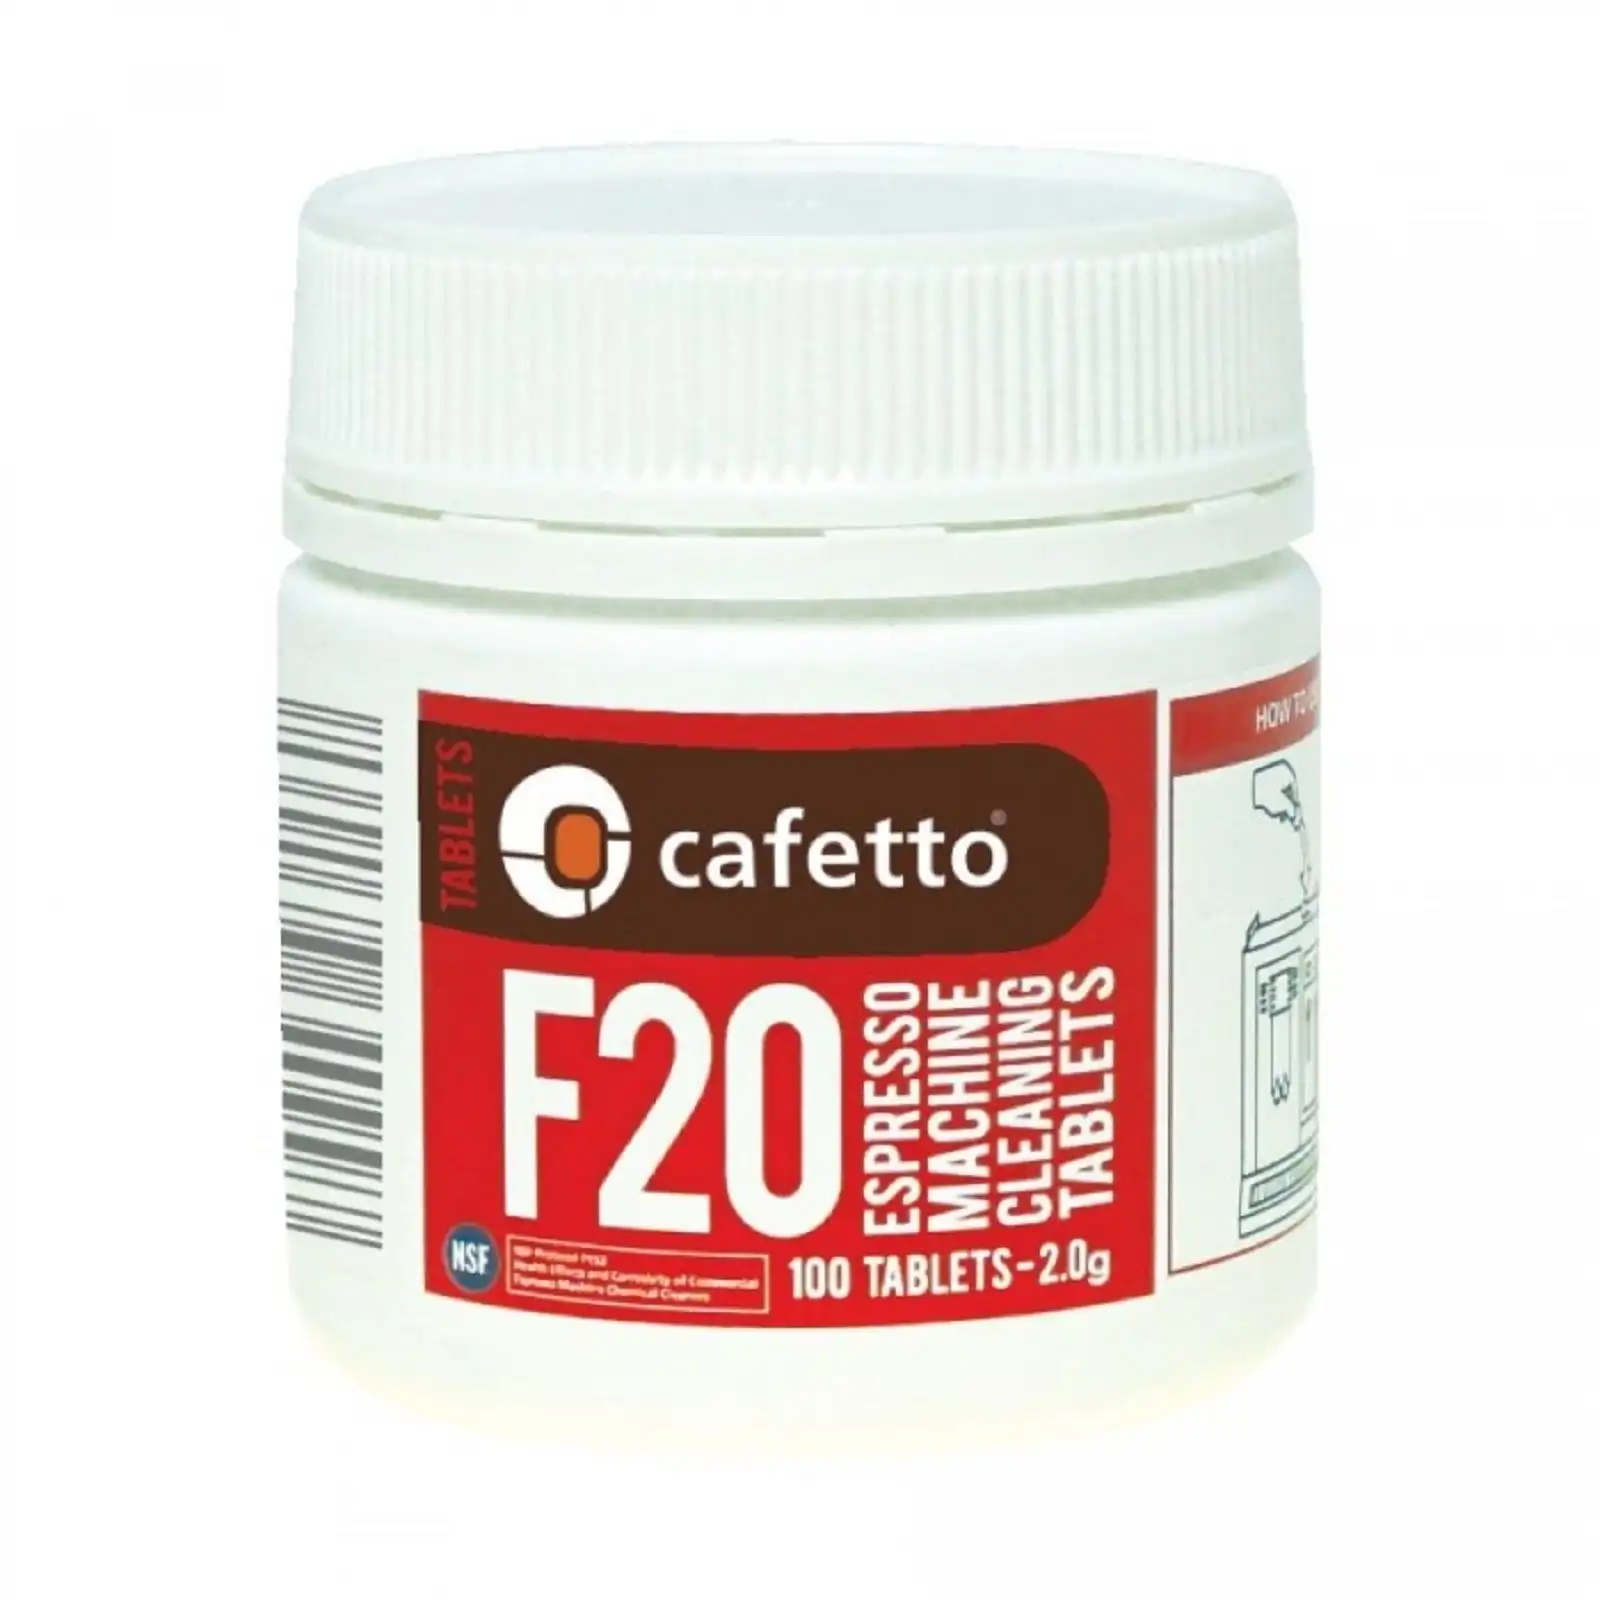 Cafetto F20 Espresso Machine Cleaning Tablets   100